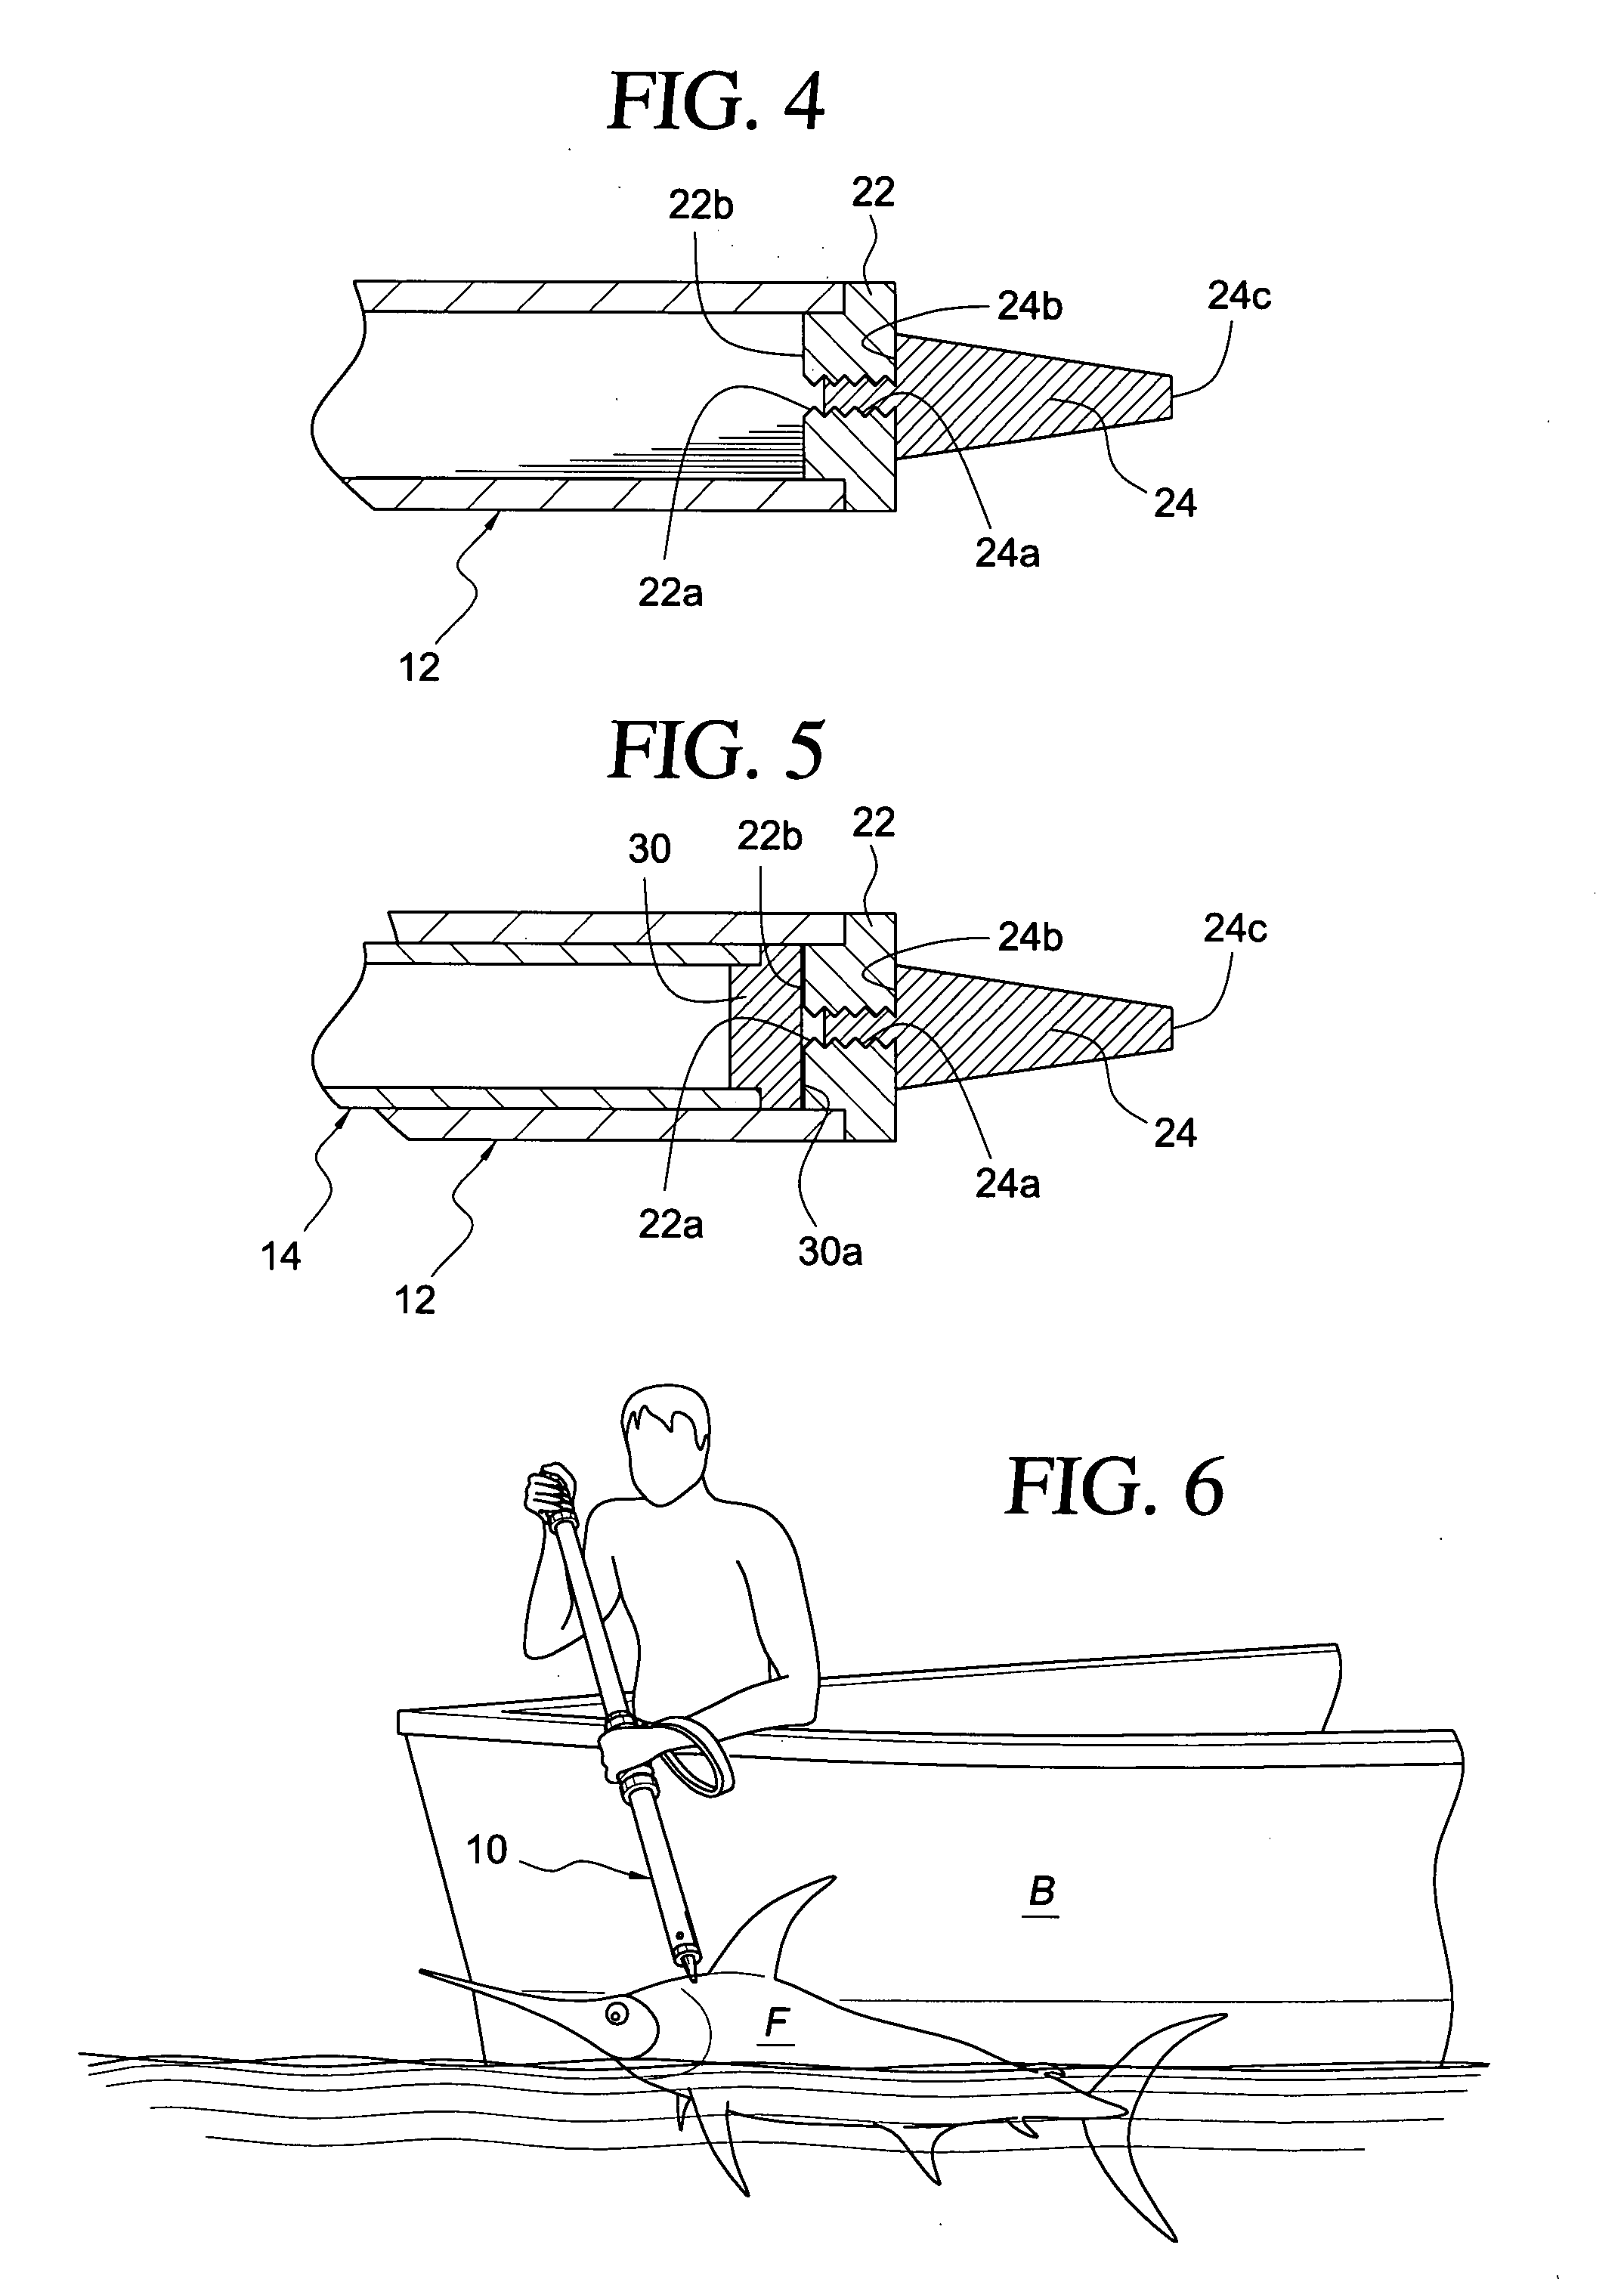 Game fish disabling device, and method